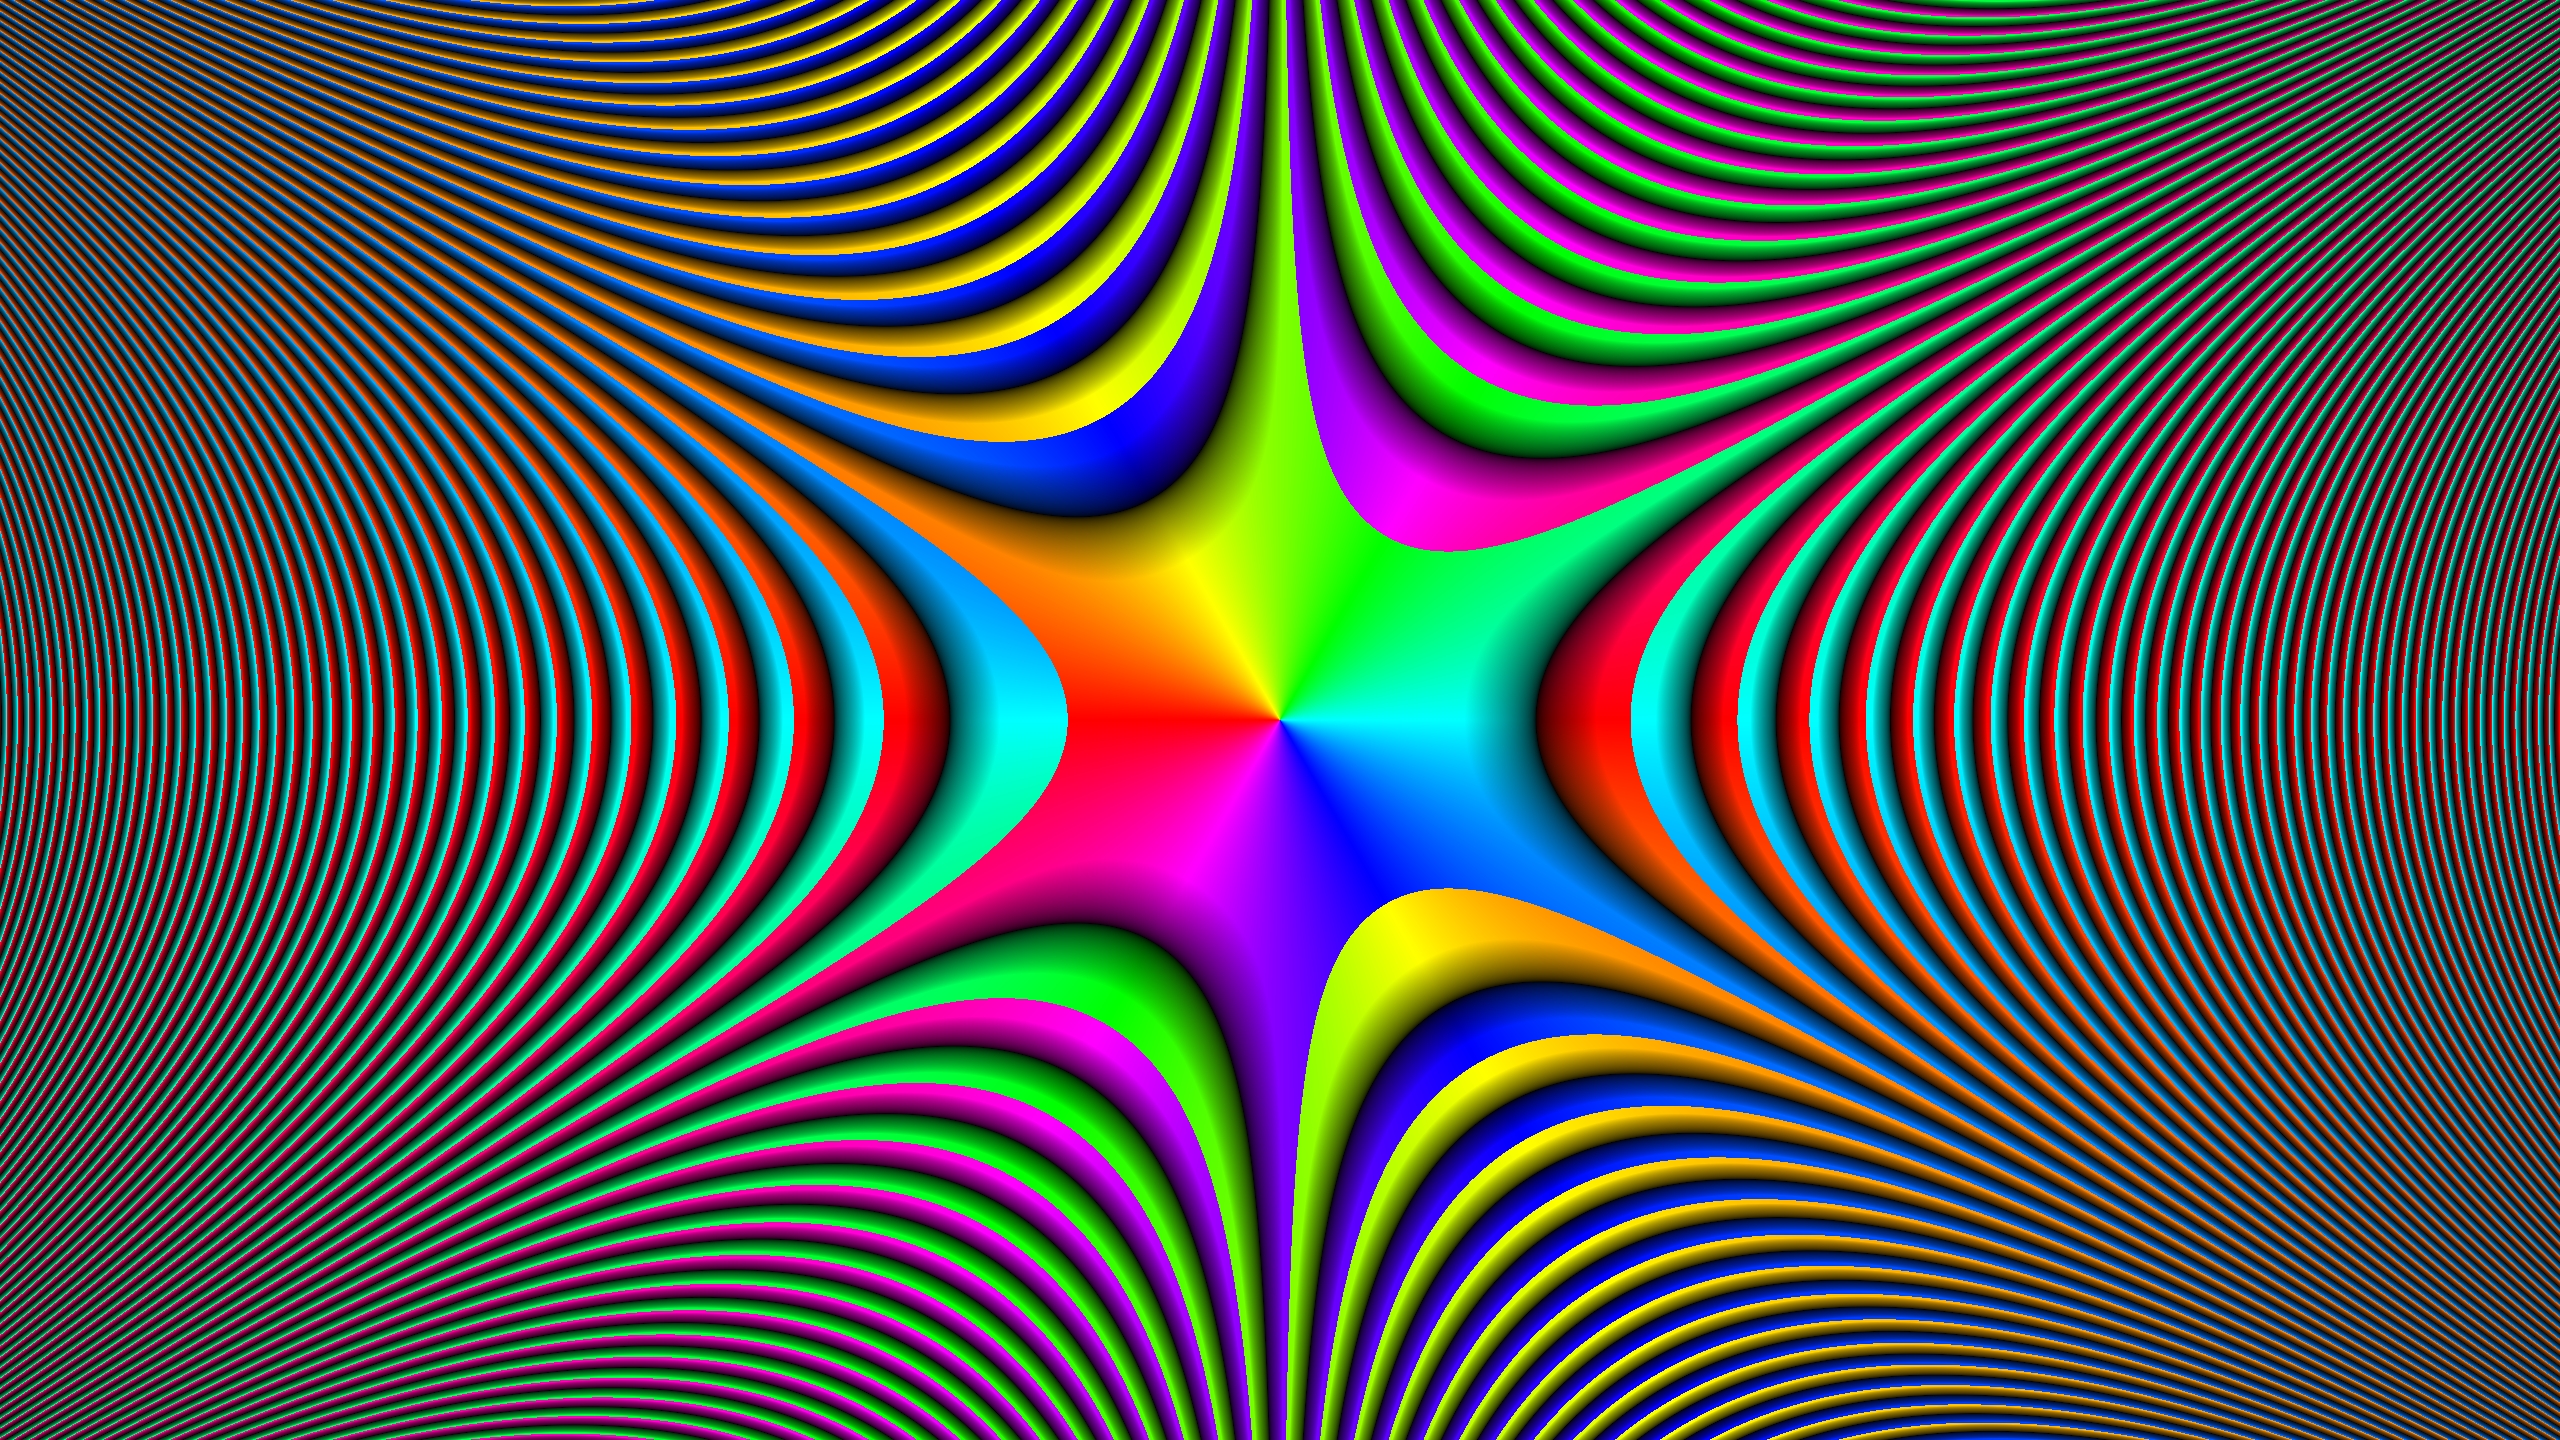 Optical Illusion IPhone Wallpaper 59 images